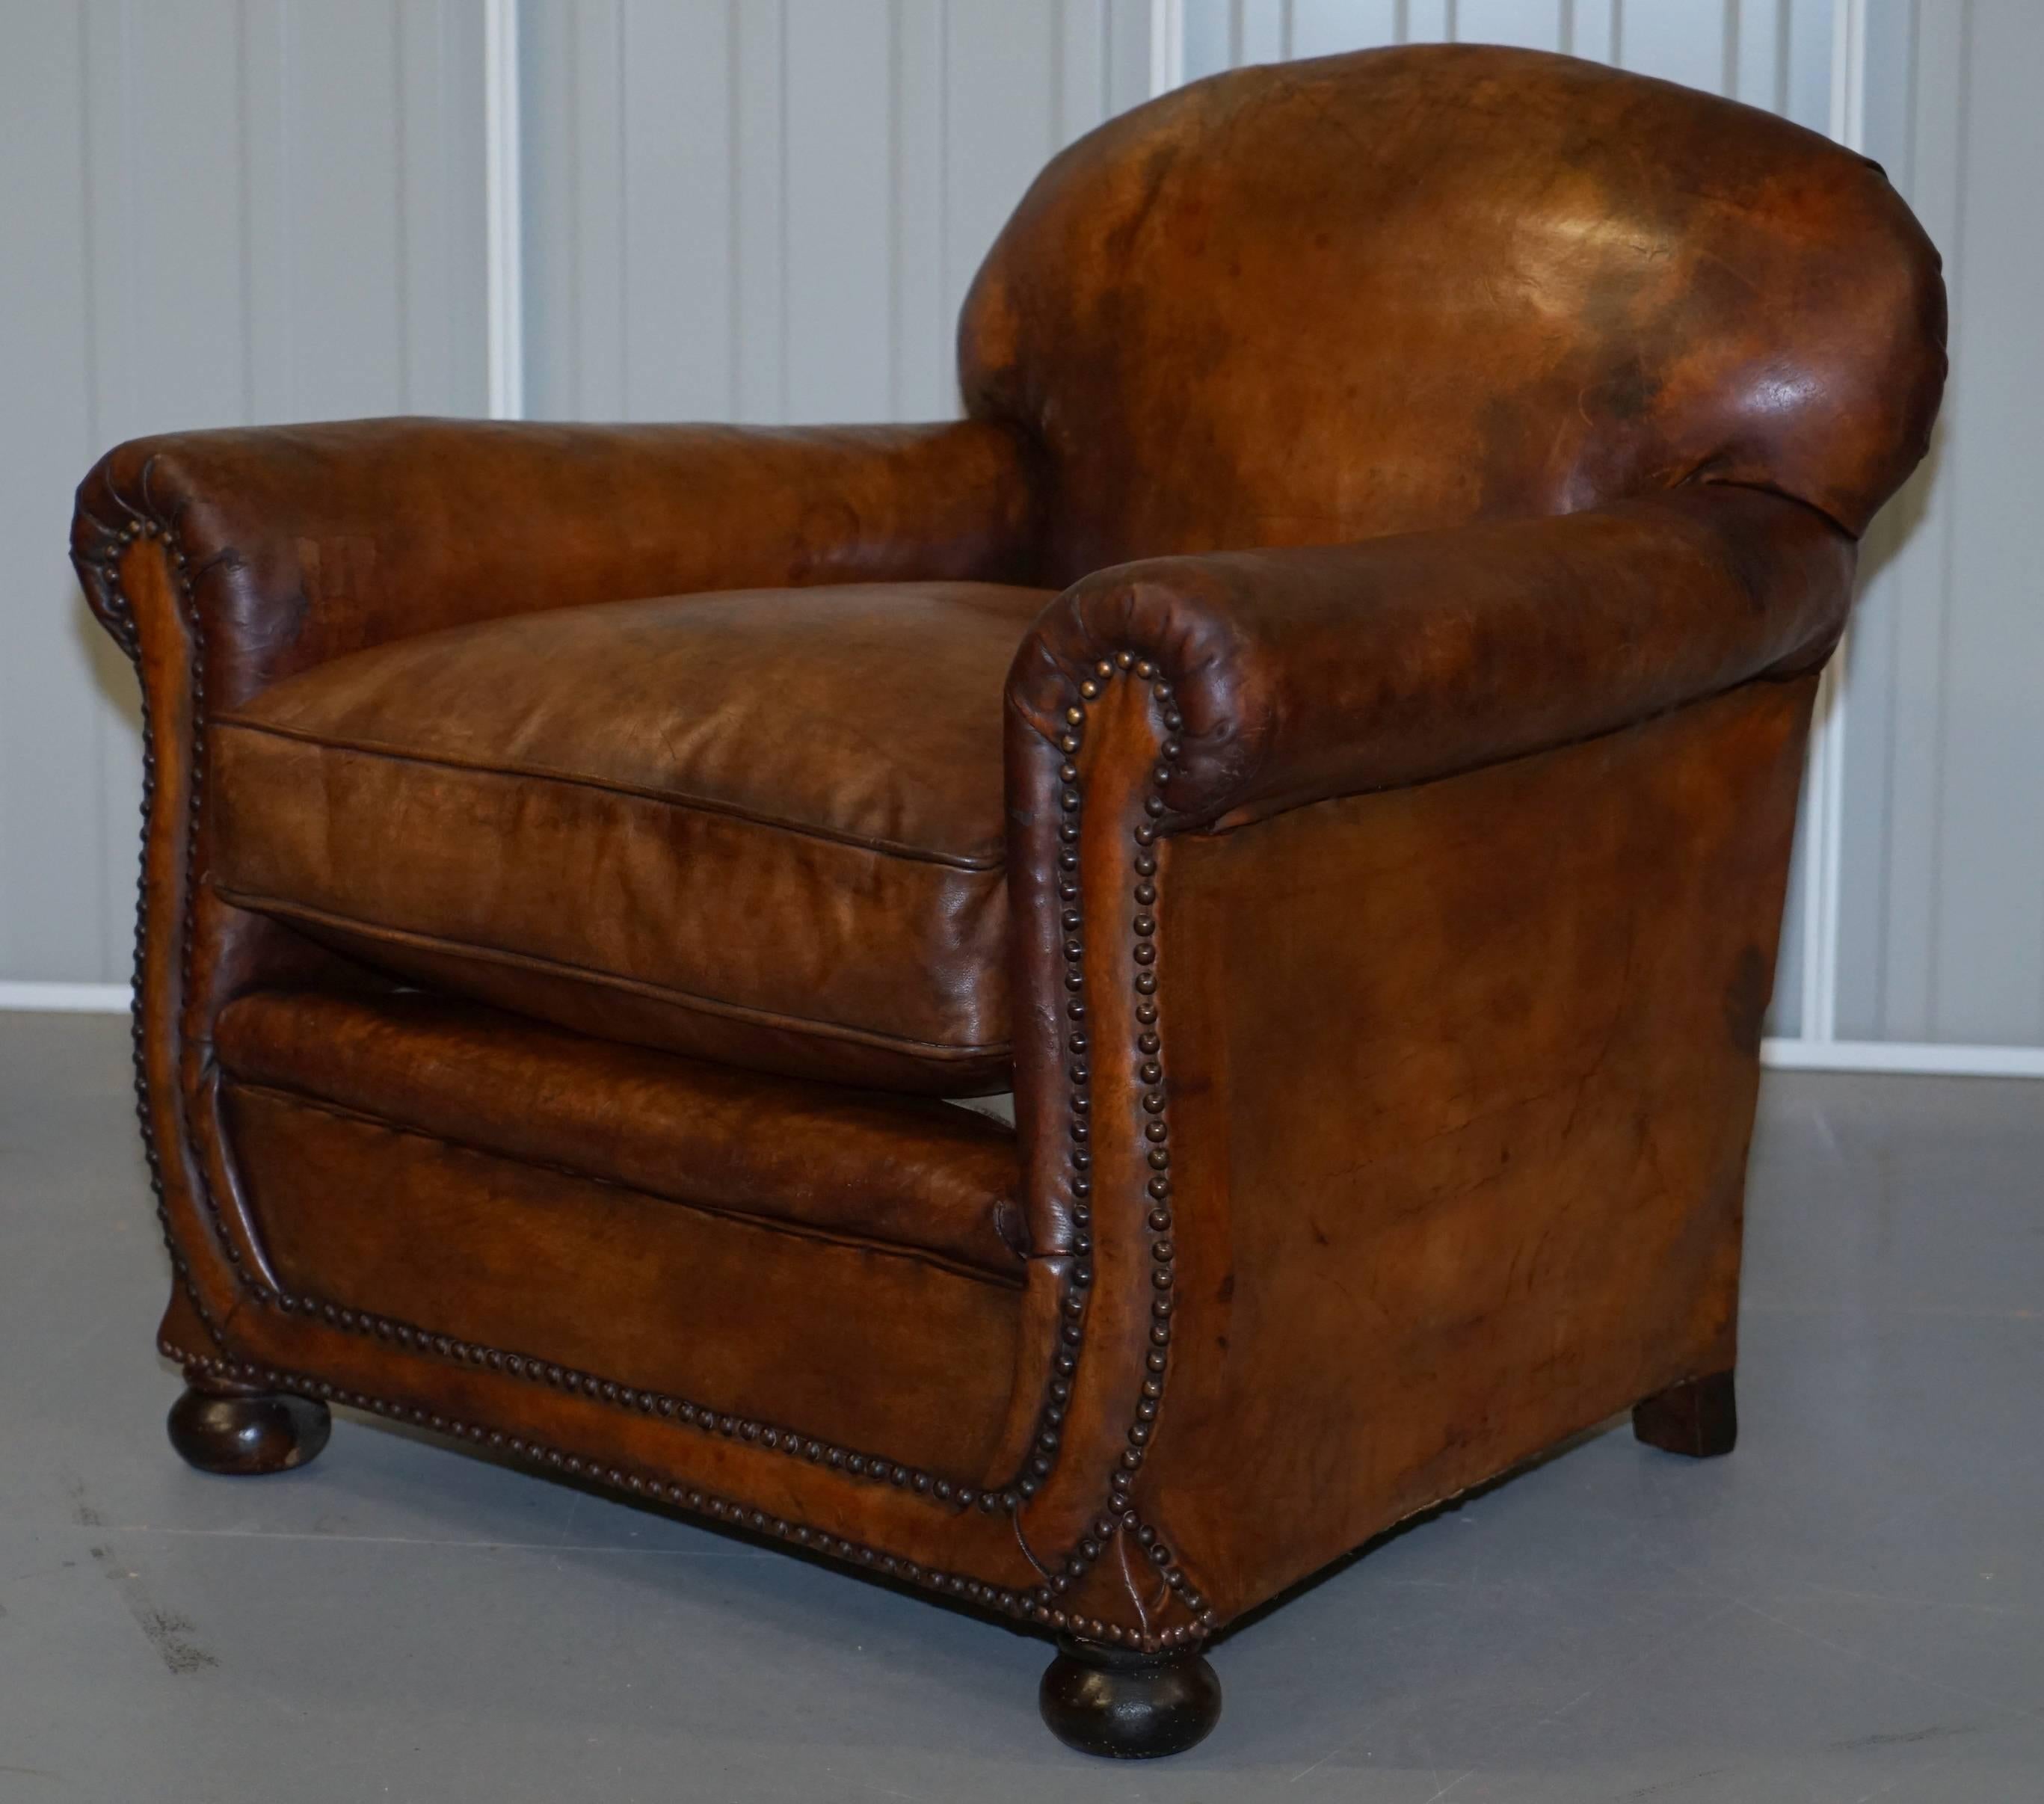 Chesterfield Edwardian Gentleman's Club Three-Piece Suite Pair of Armchairs and Sofa